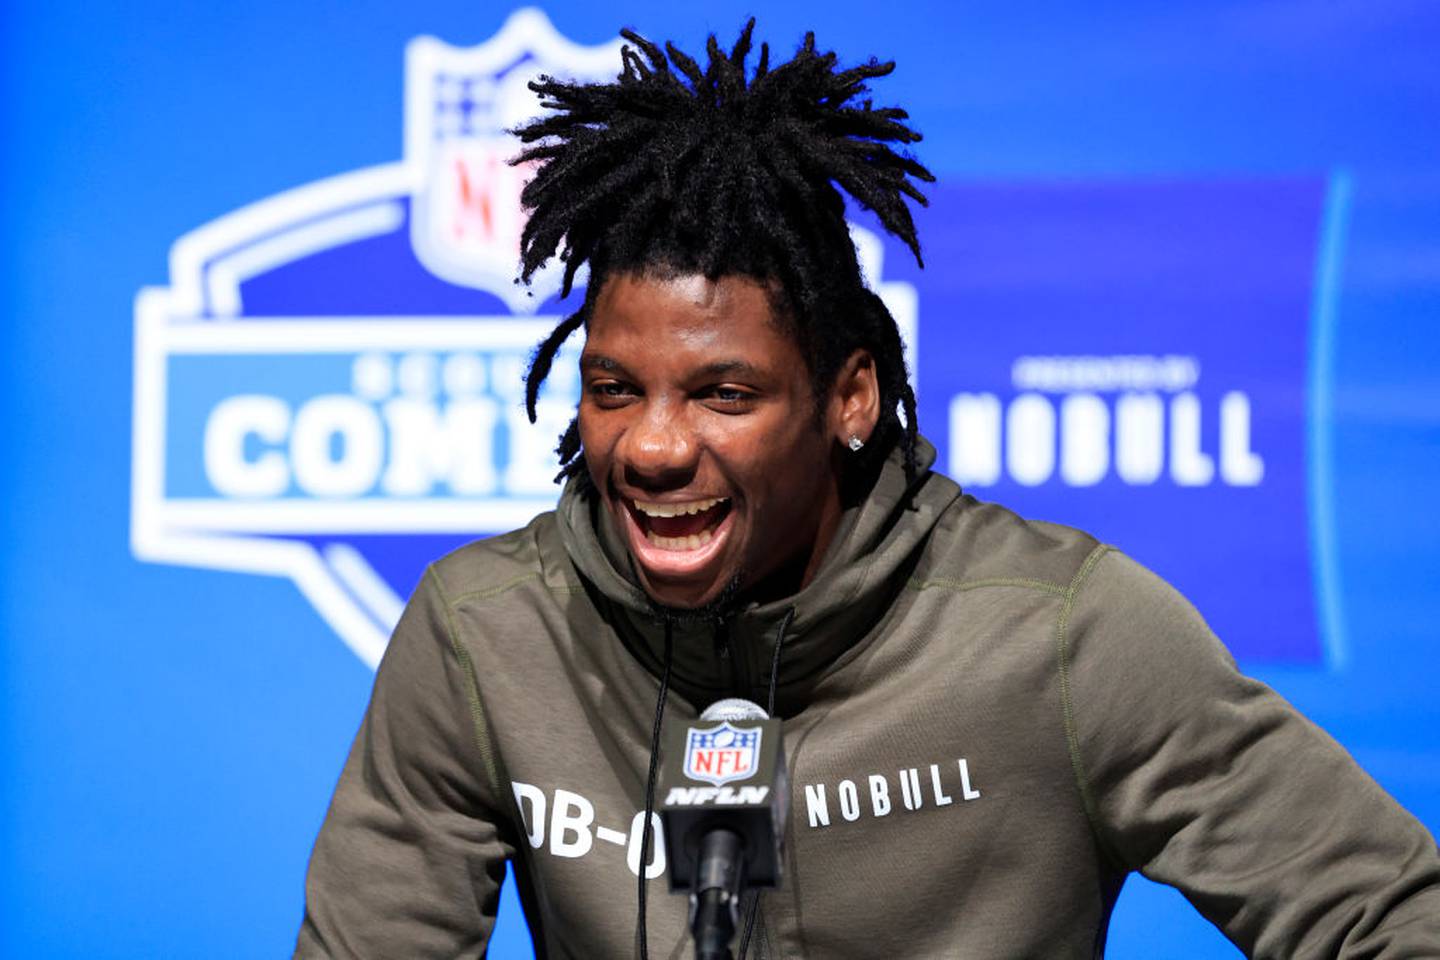 INDIANAPOLIS, INDIANA - MARCH 02: Tae Banks #DB02 of Maryland speaks with the media during the NFL Combine at Lucas Oil Stadium on March 02, 2023 in Indianapolis, Indiana.